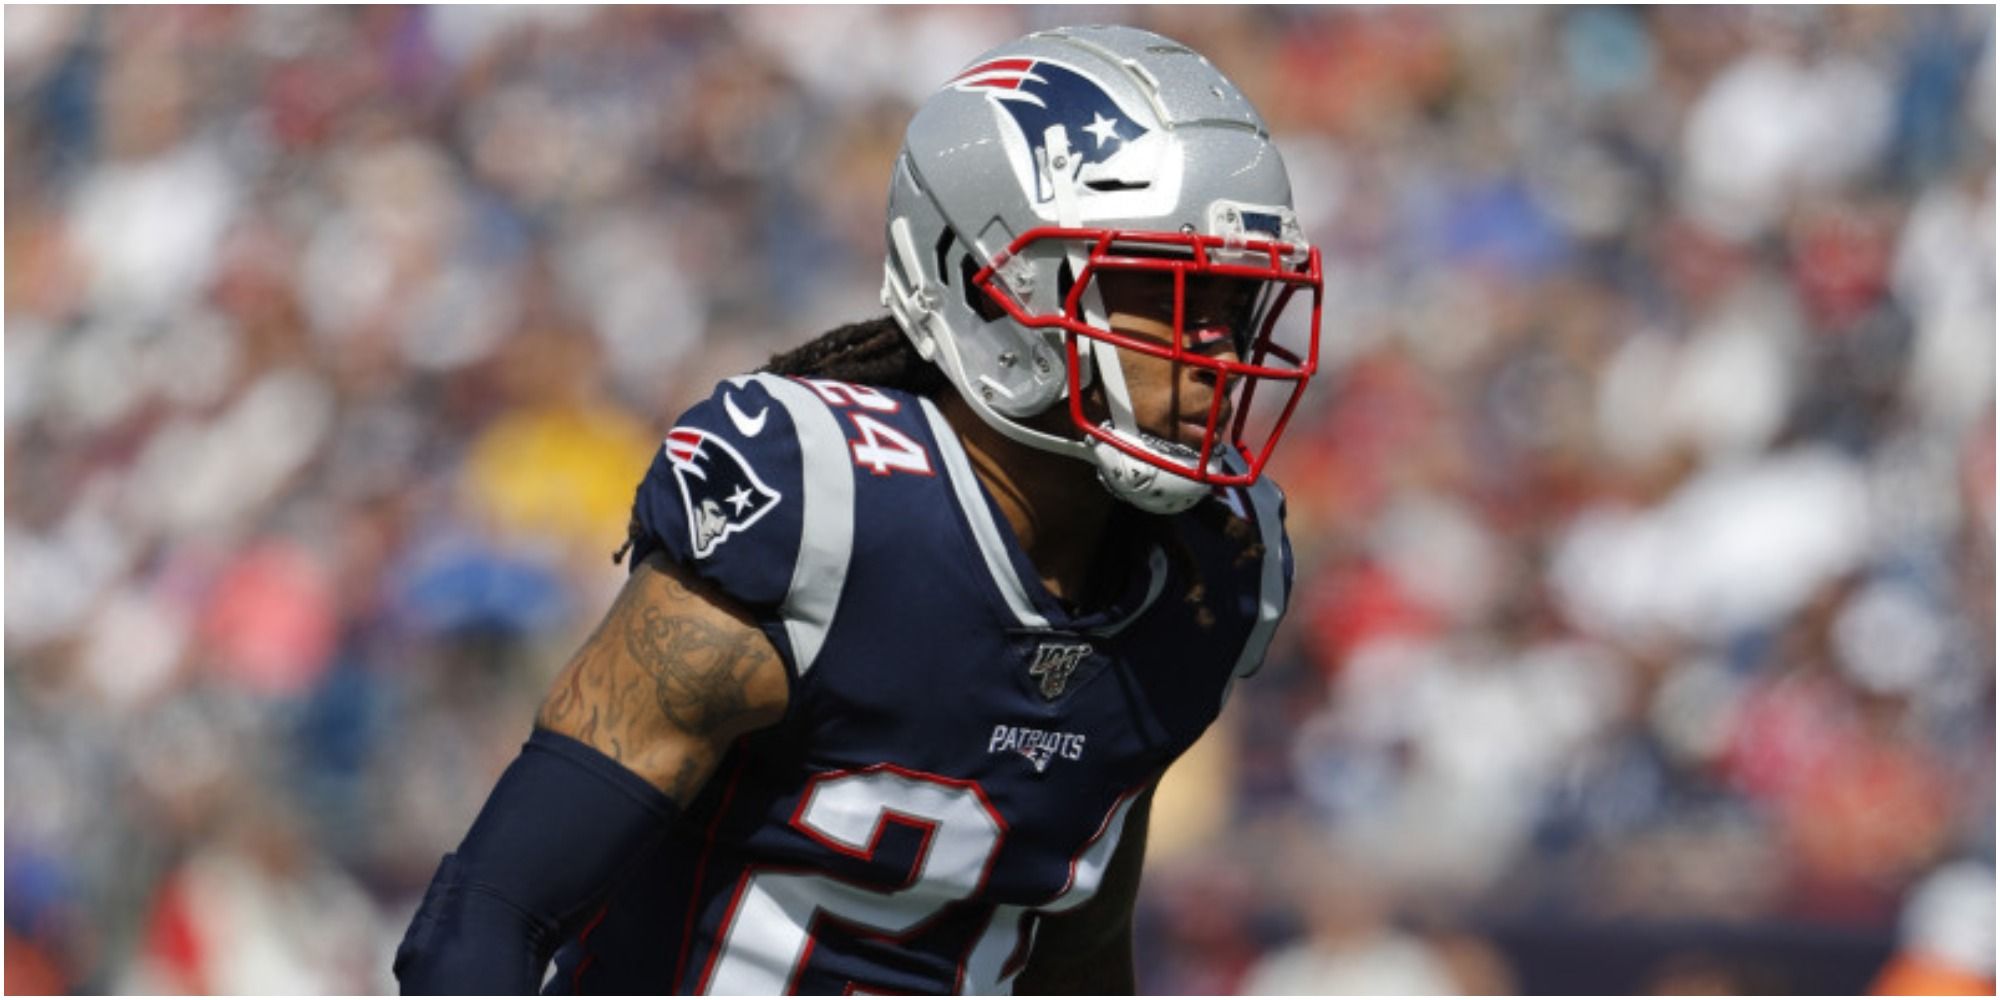 Madden-NFL-22-Stephon-Gilmore-Watching-The-QB-For-The-Play-1